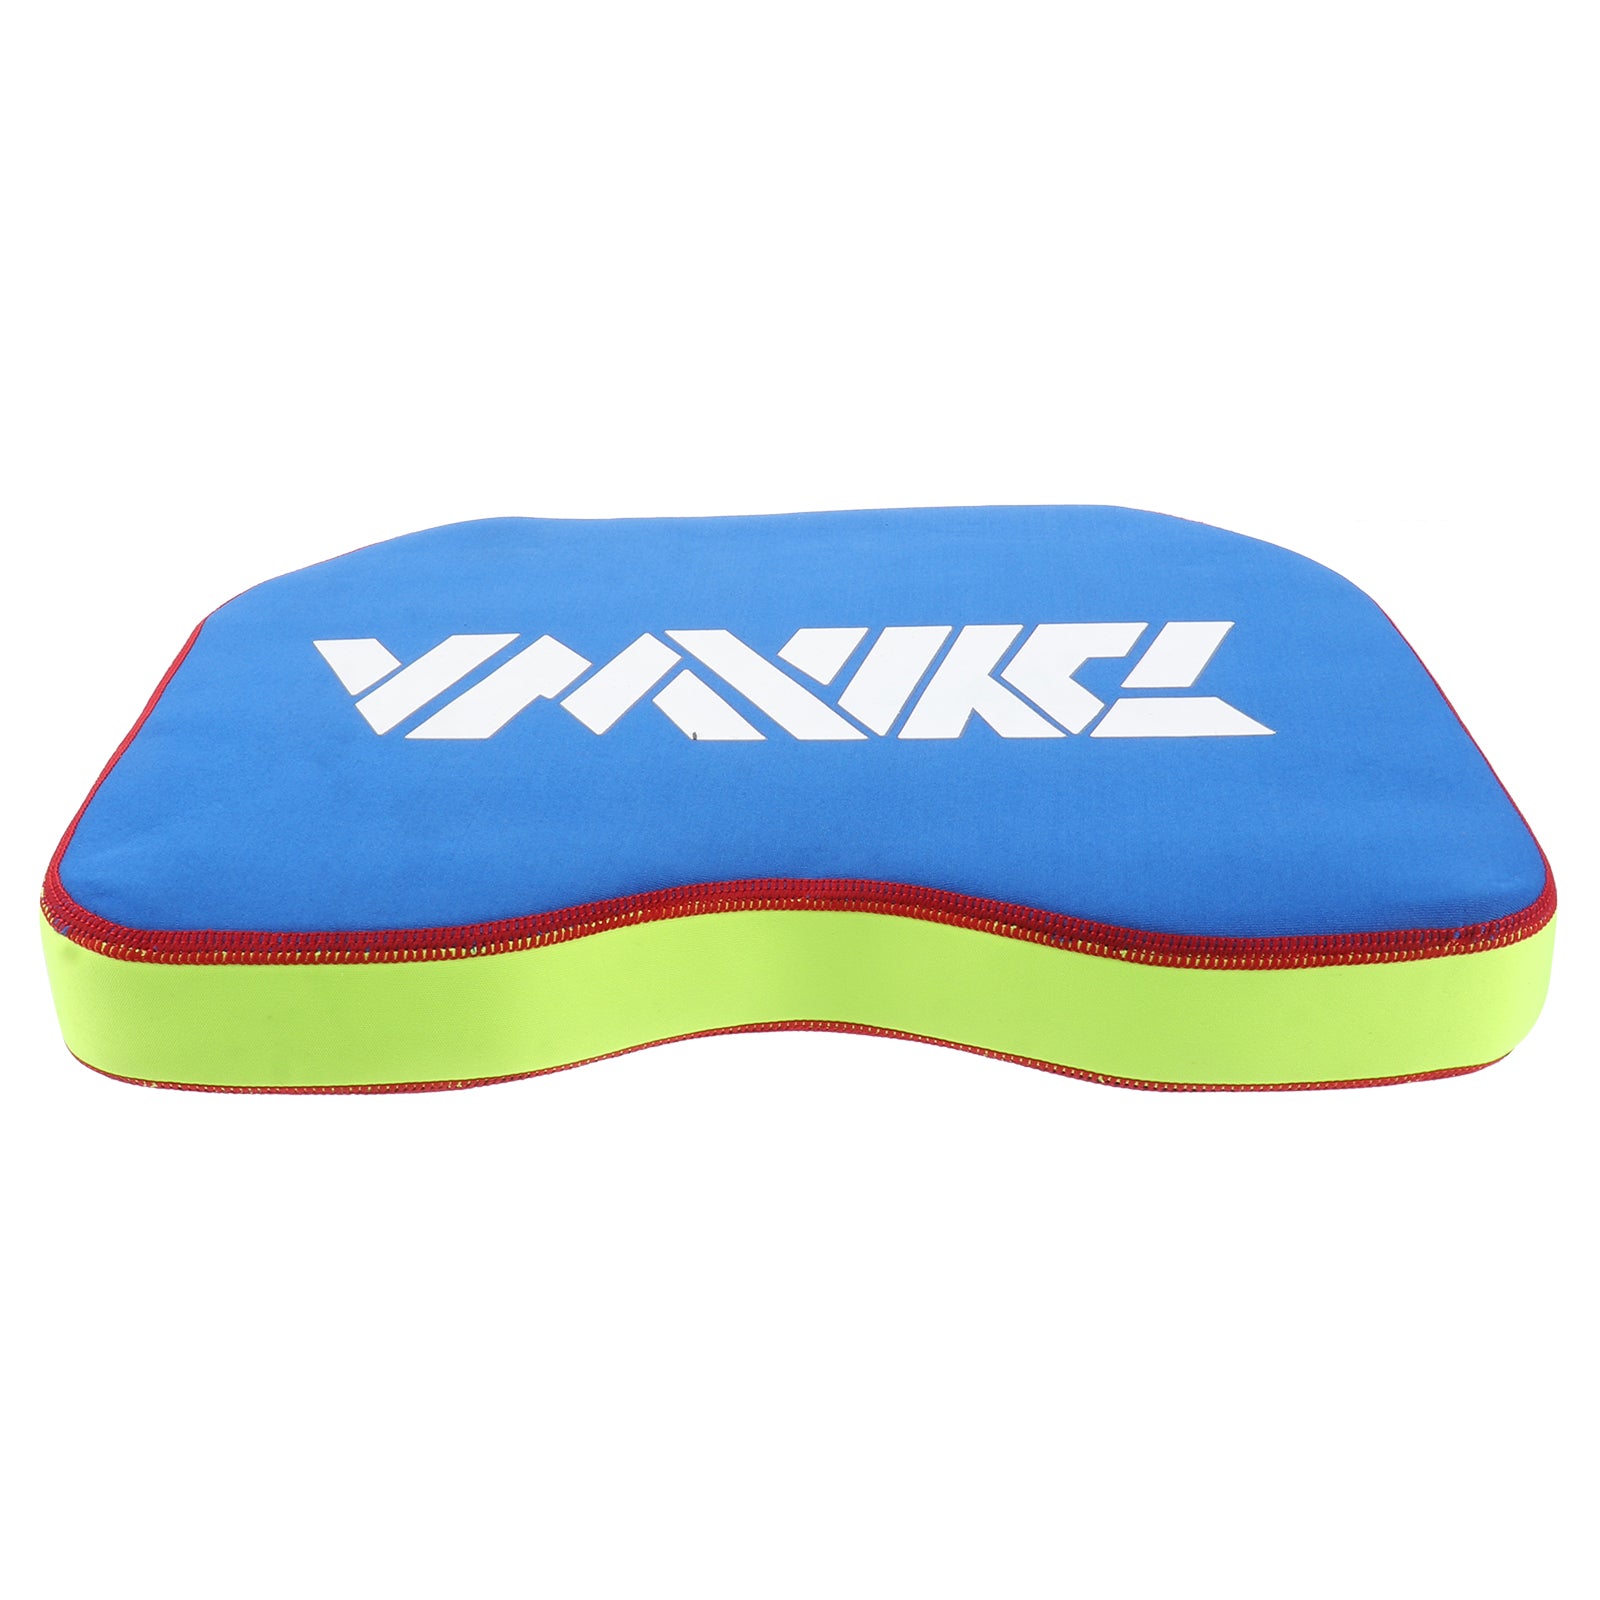 NUOLUX Seat Cushion Comfortable Thicken Canoe Fishing Boat Seat Cushion Pad with Suction Cups for Kayaking Fishing Camping(Blue)